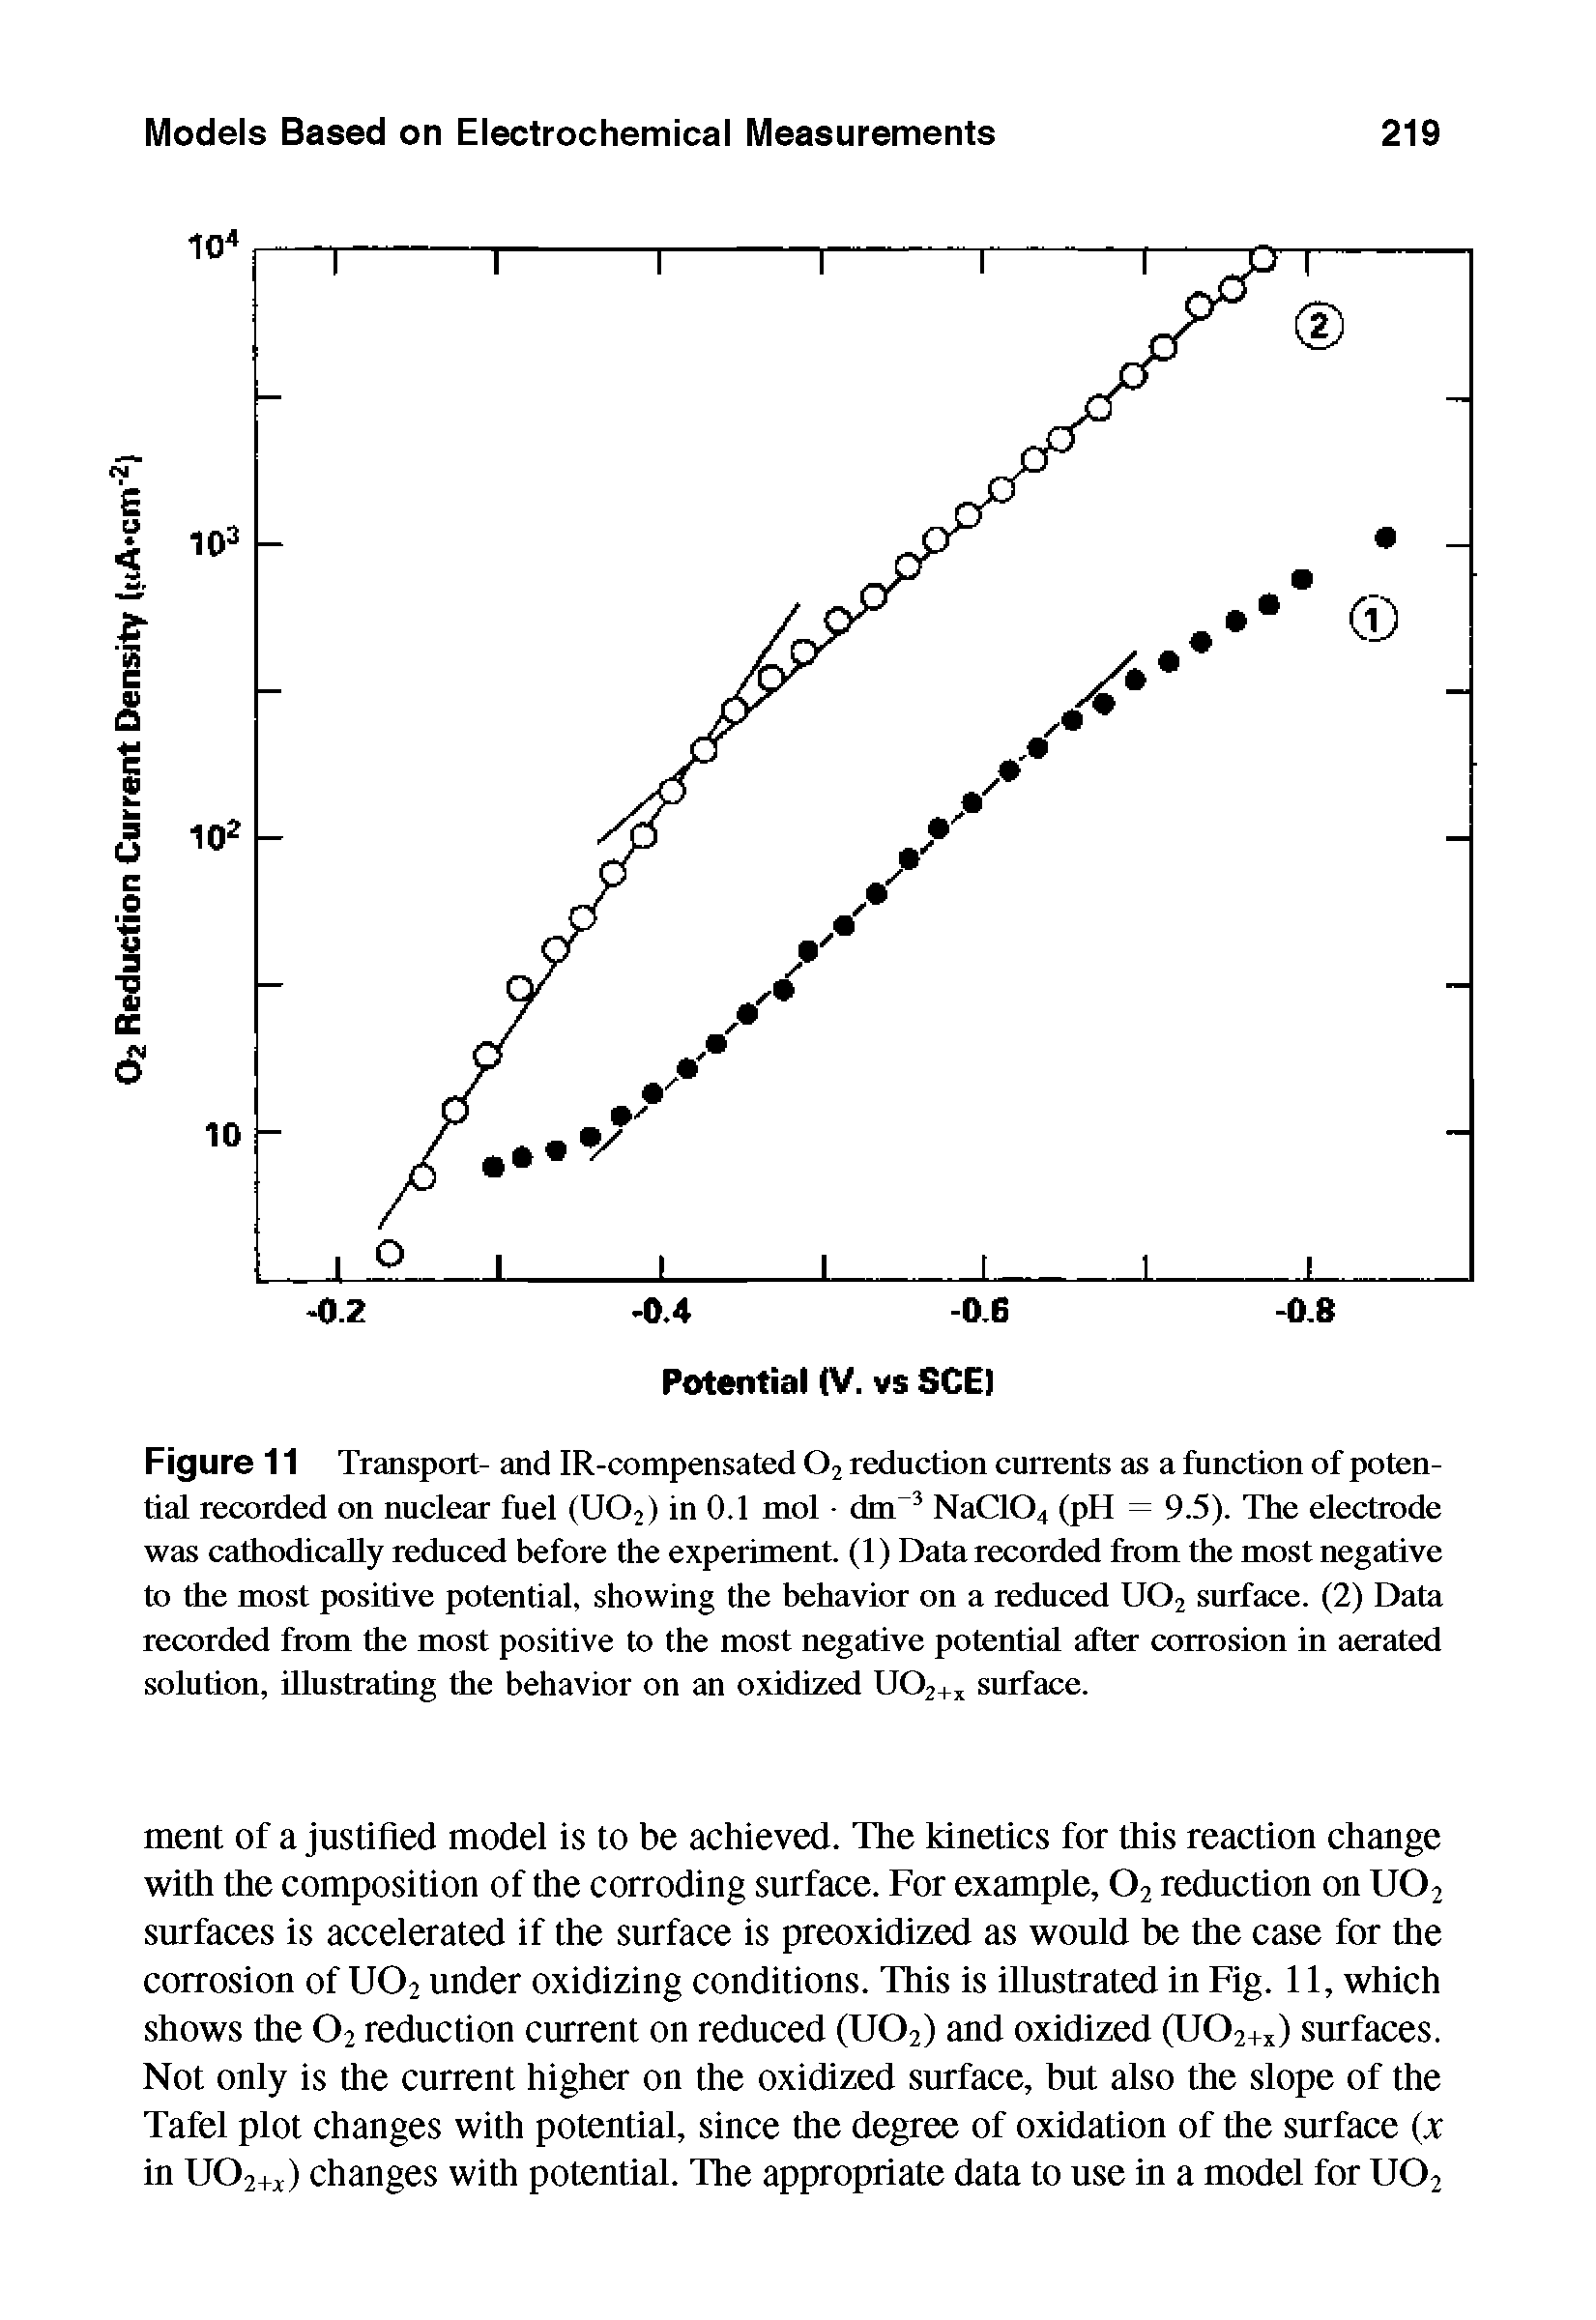 Figure 11 Transport- and IR-compensated 02 reduction currents as a function of potential recorded on nuclear fuel (U02) in 0.1 mol dm3 NaC104 (pH = 9.5). The electrode was cathodically reduced before the experiment. (1) Data recorded from the most negative to the most positive potential, showing the behavior on a reduced U02 surface. (2) Data recorded from the most positive to the most negative potential after corrosion in aerated solution, illustrating the behavior on an oxidized U02+x surface.